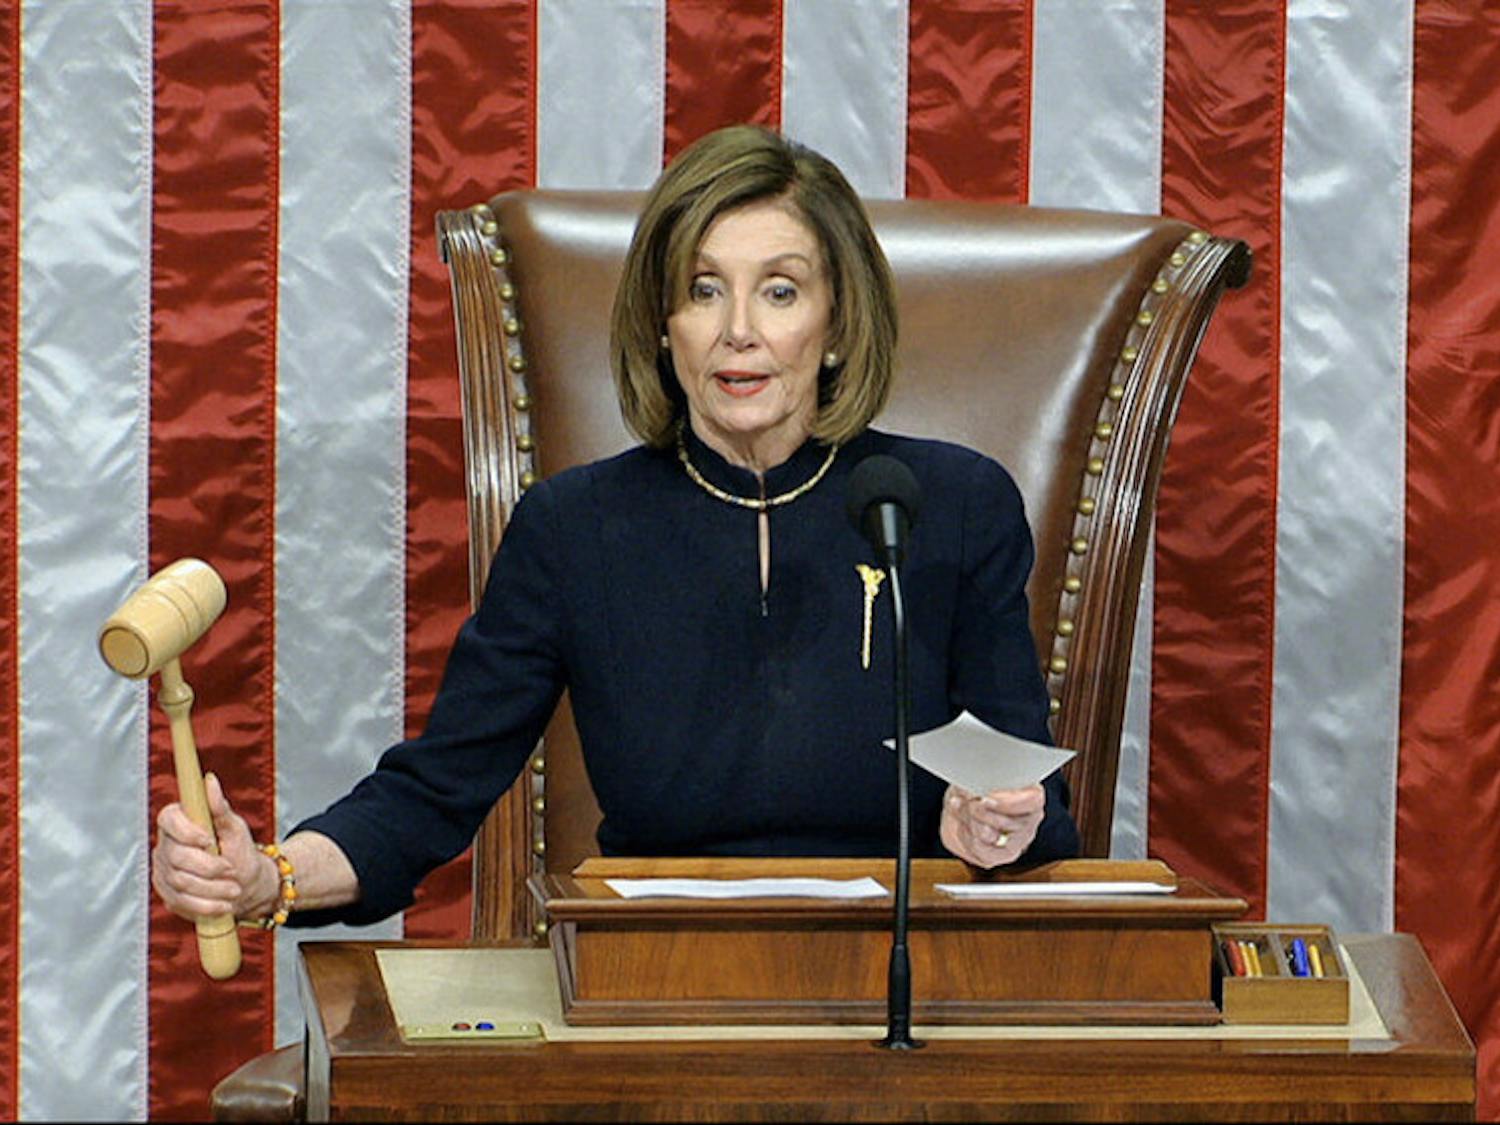 House Speaker Nancy Pelosi of Calif., announces the passage of the first article of impeachment, abuse of power, against President Donald Trump by the House of Representatives at the Capitol in Washington, Wednesday, Dec. 18, 2019. (House Television via AP)